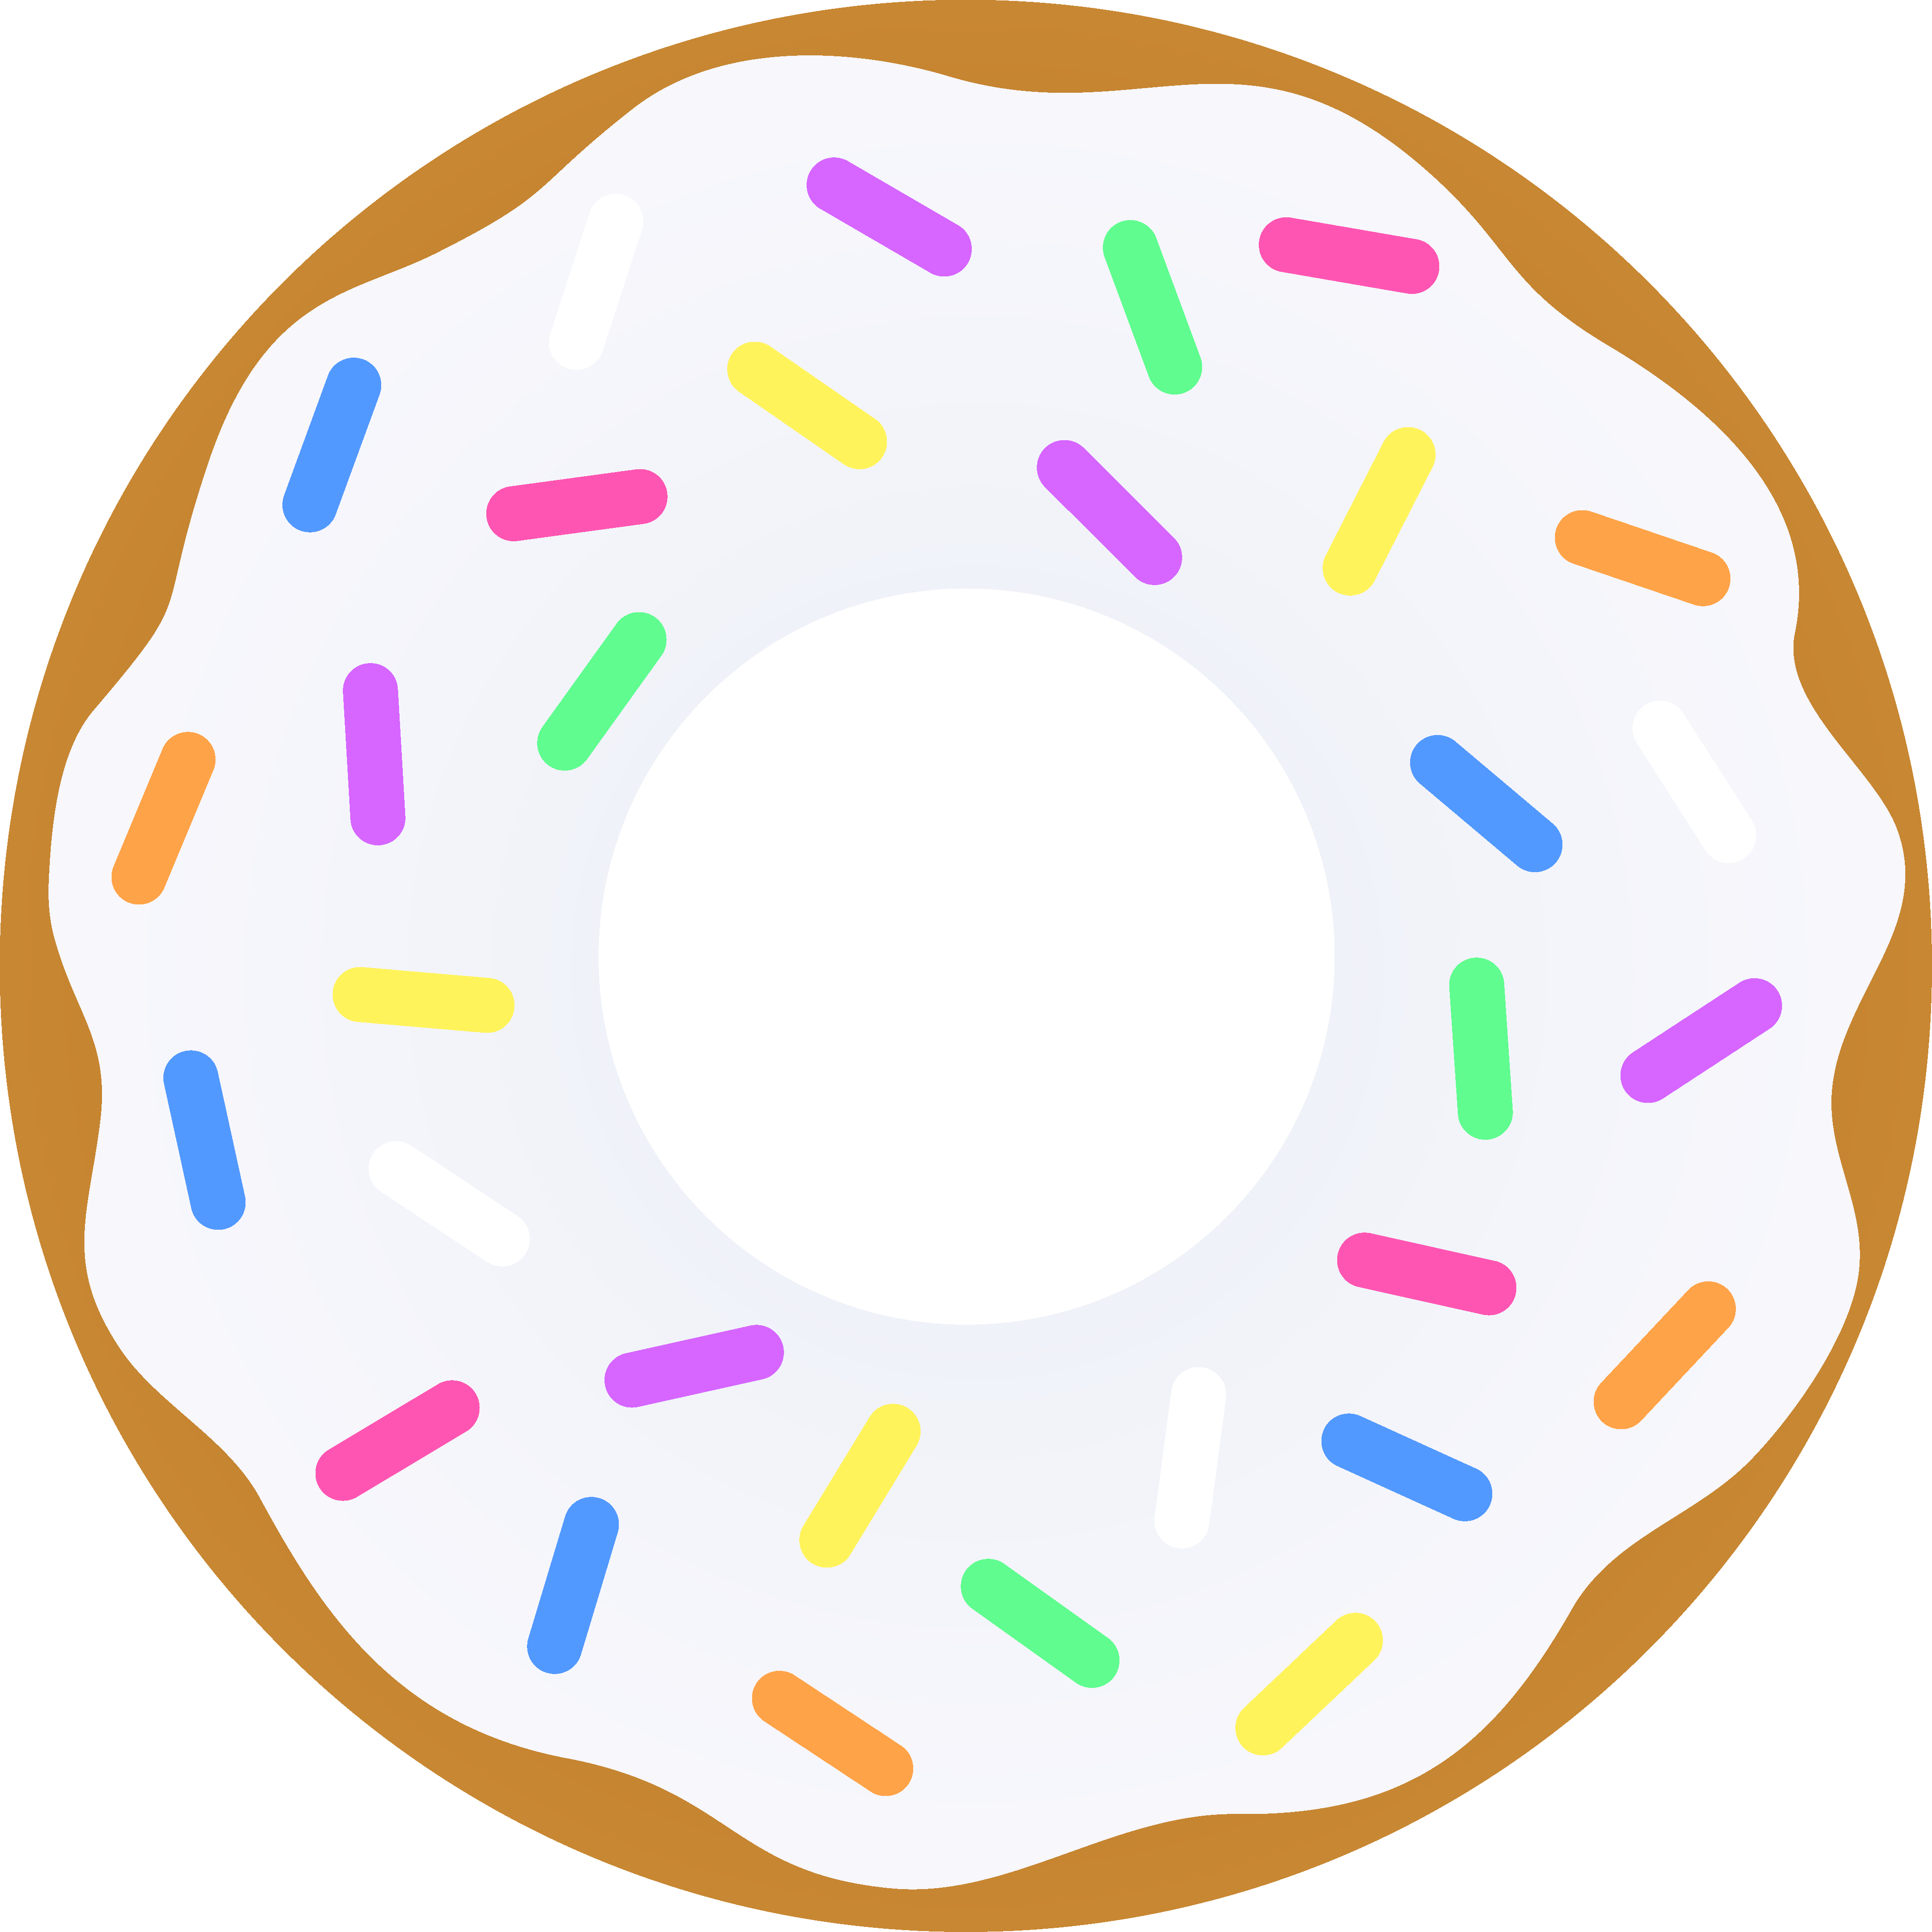 Doughnut Images - Cliparts.co